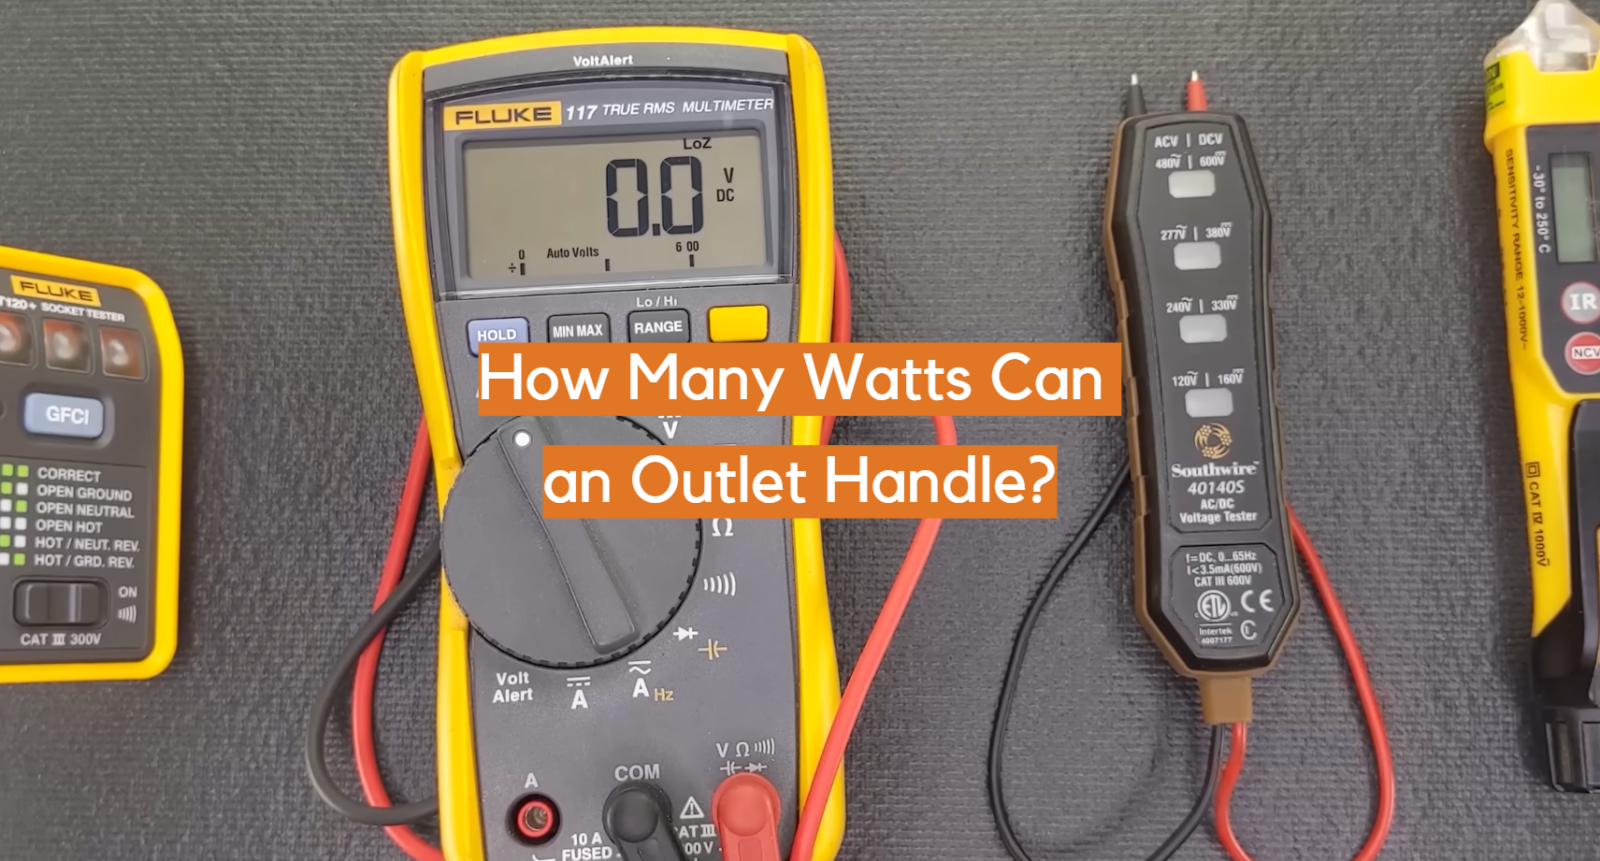 How Many Watts Can an Outlet Handle?